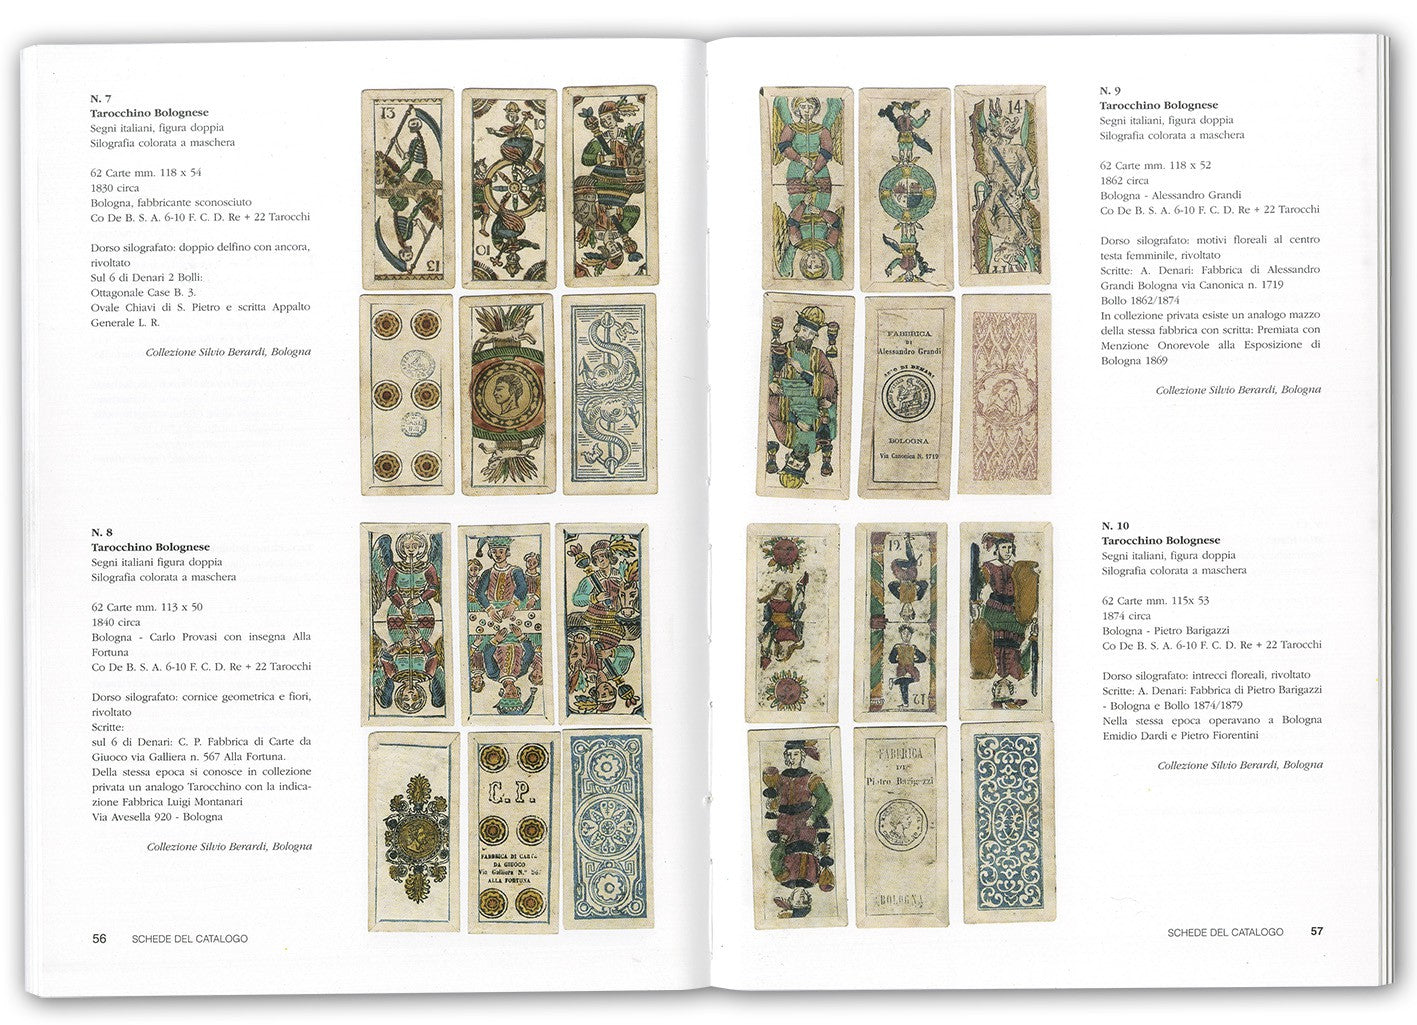 Playing cards in Emilia and Romagna - 18th and 19th centuries